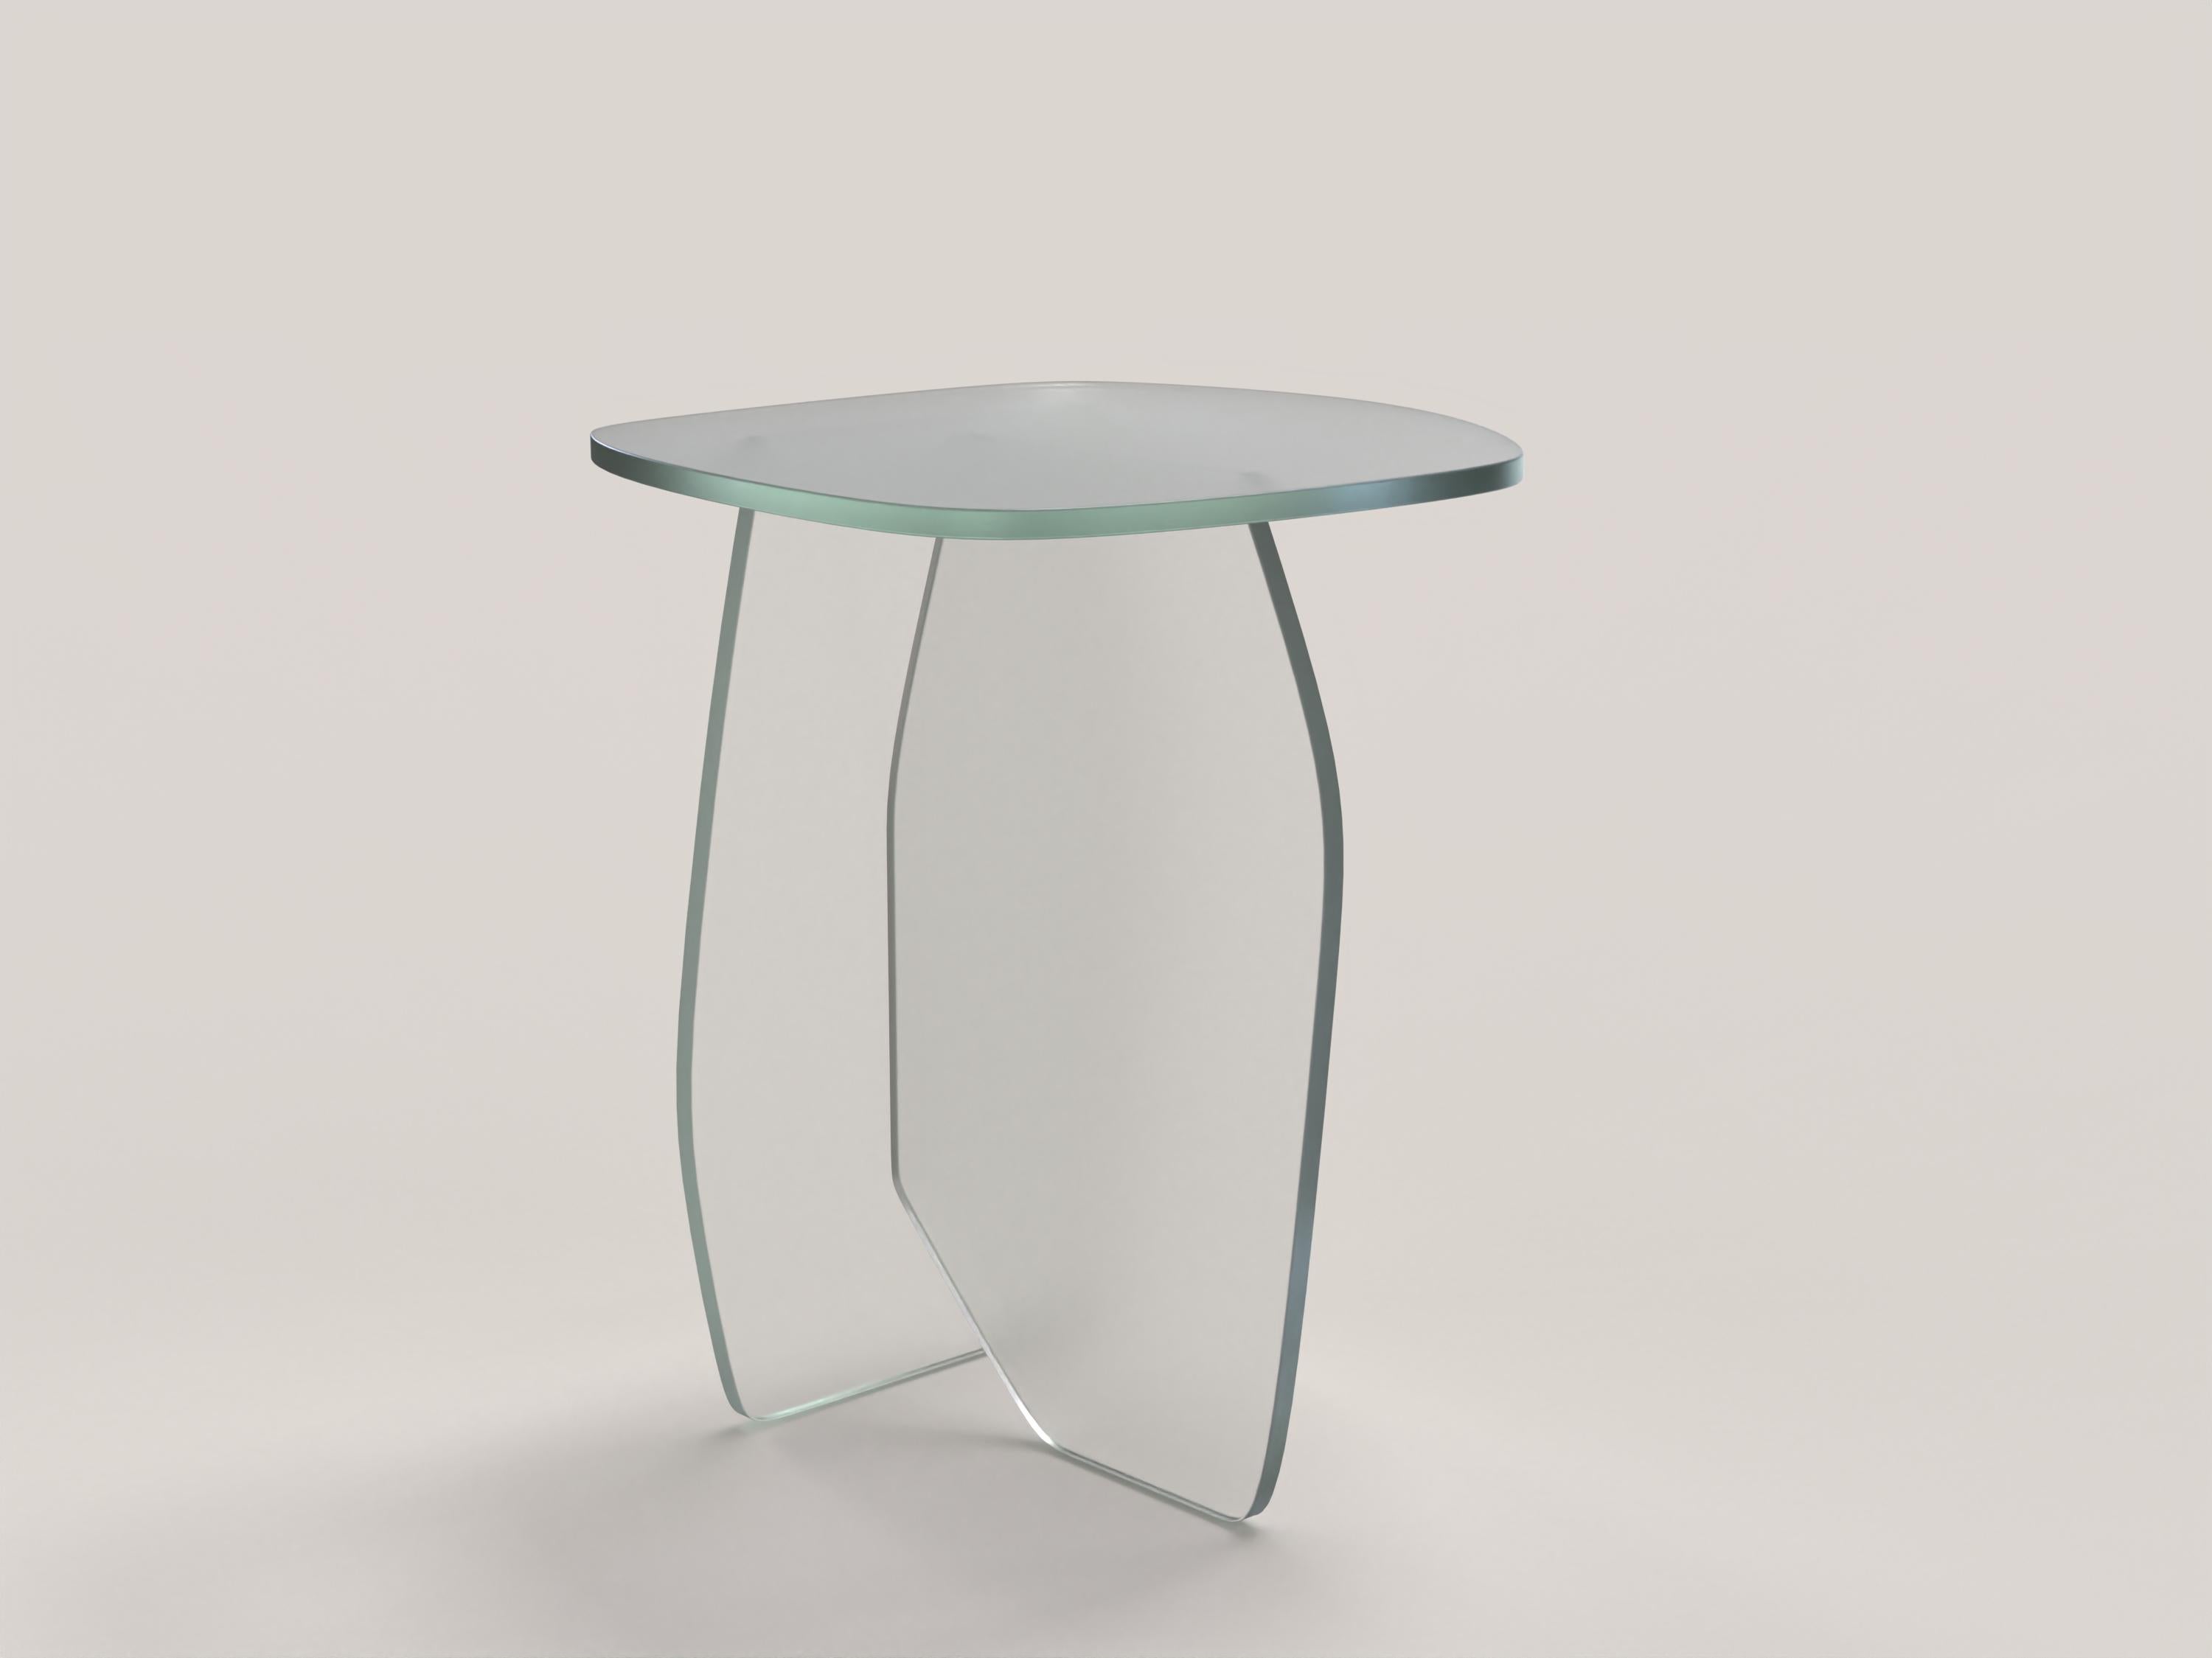 Panorama V1 Side Table by Edizione Limitata
Limited Edition of 1000 pieces. Signed and numbered.
Dimensions: D 33 x W 36 x H 39 cm.
Materials: Satin transparent tempered glass.

Panorama V1 and V2 are respectively contemporary side and low table